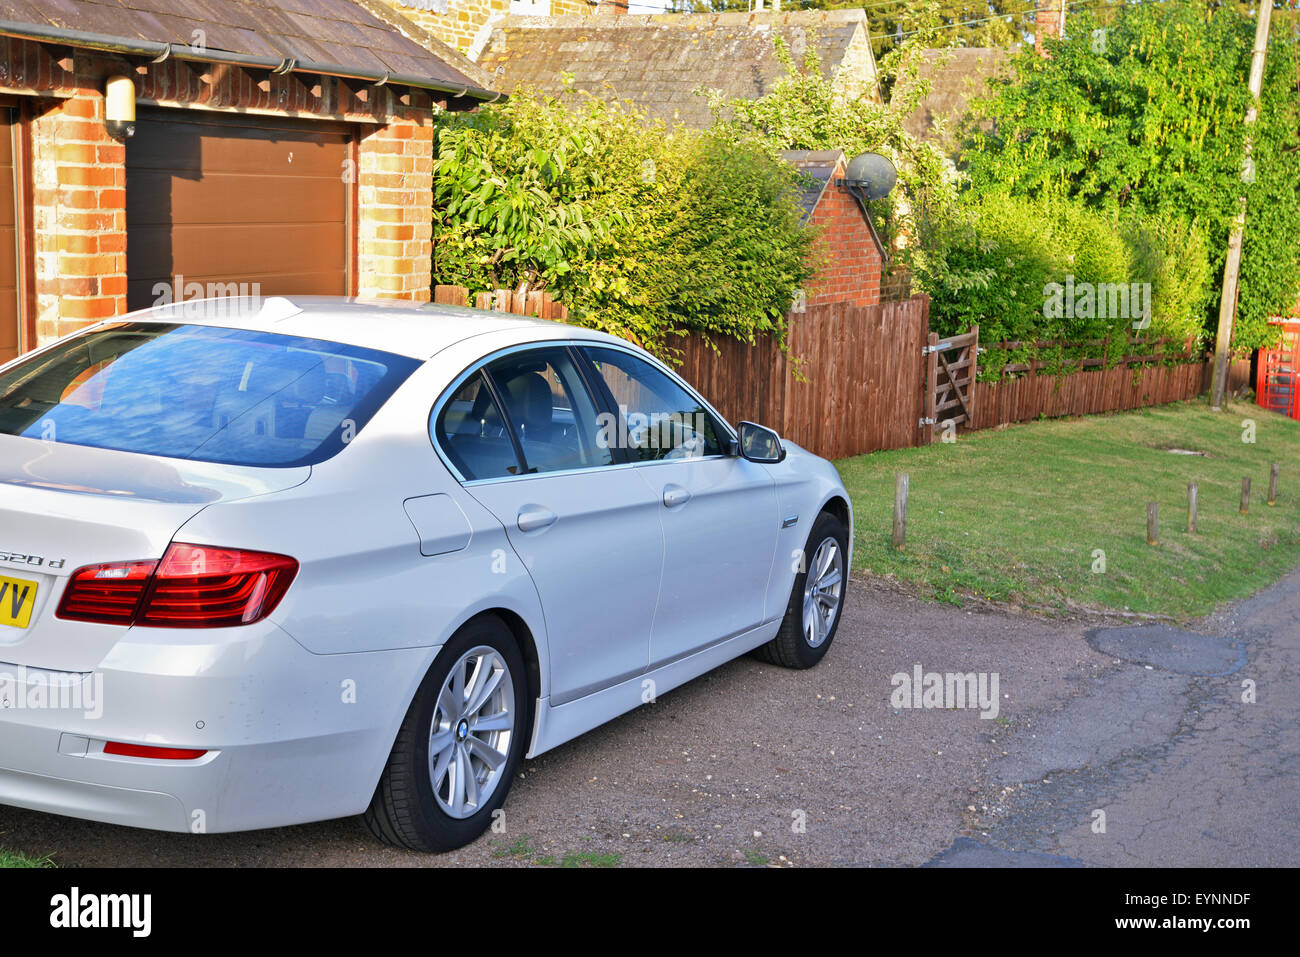 White BMW 520 car parked on side of road in Village location United Kingdom Stock Photo